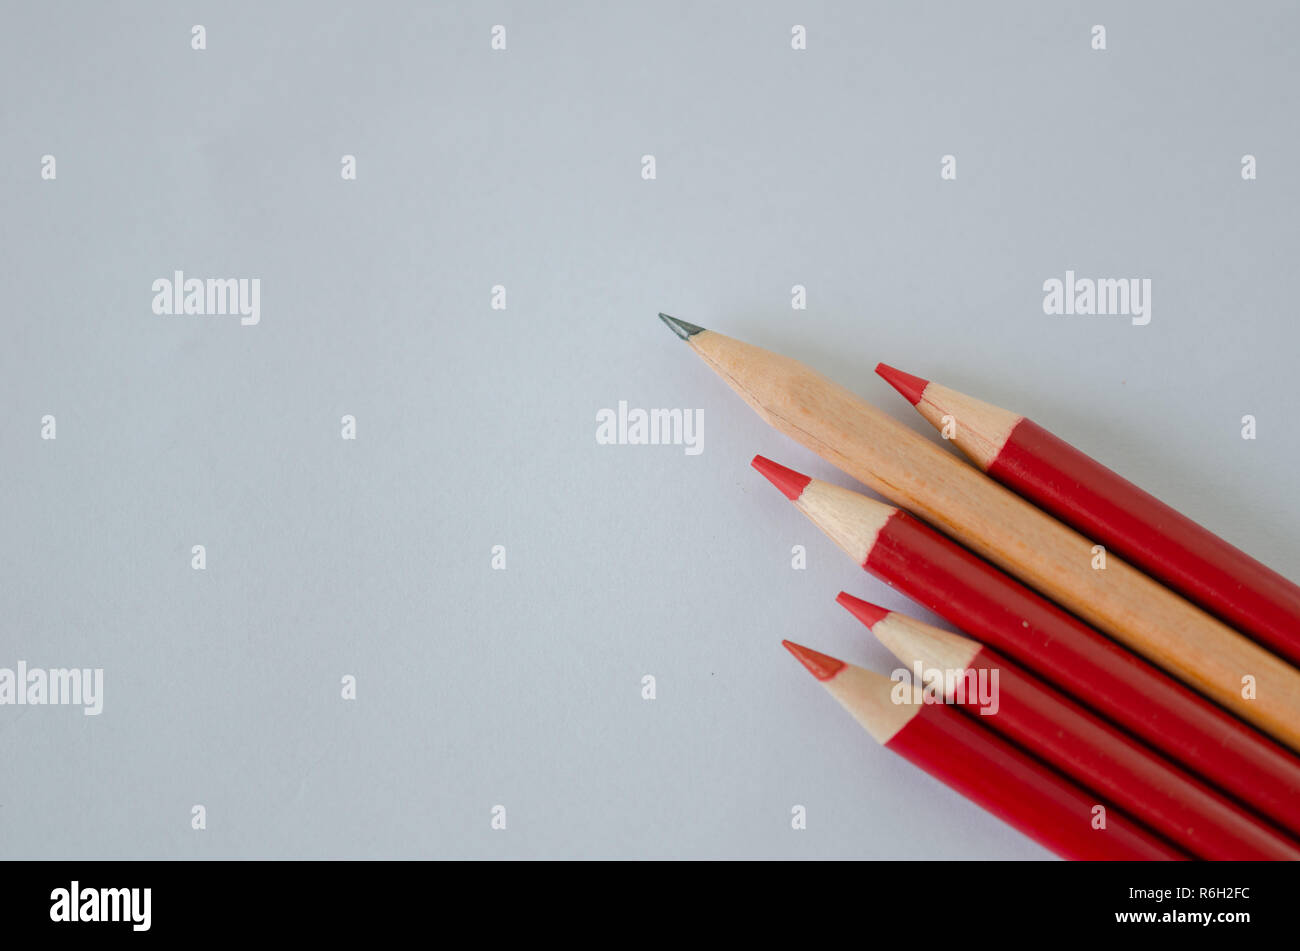 Many group of red pencils but yellow color pencil standing out from crowd of plenty identical, leadership, independence, uniqueness, initiative, initi Stock Photo